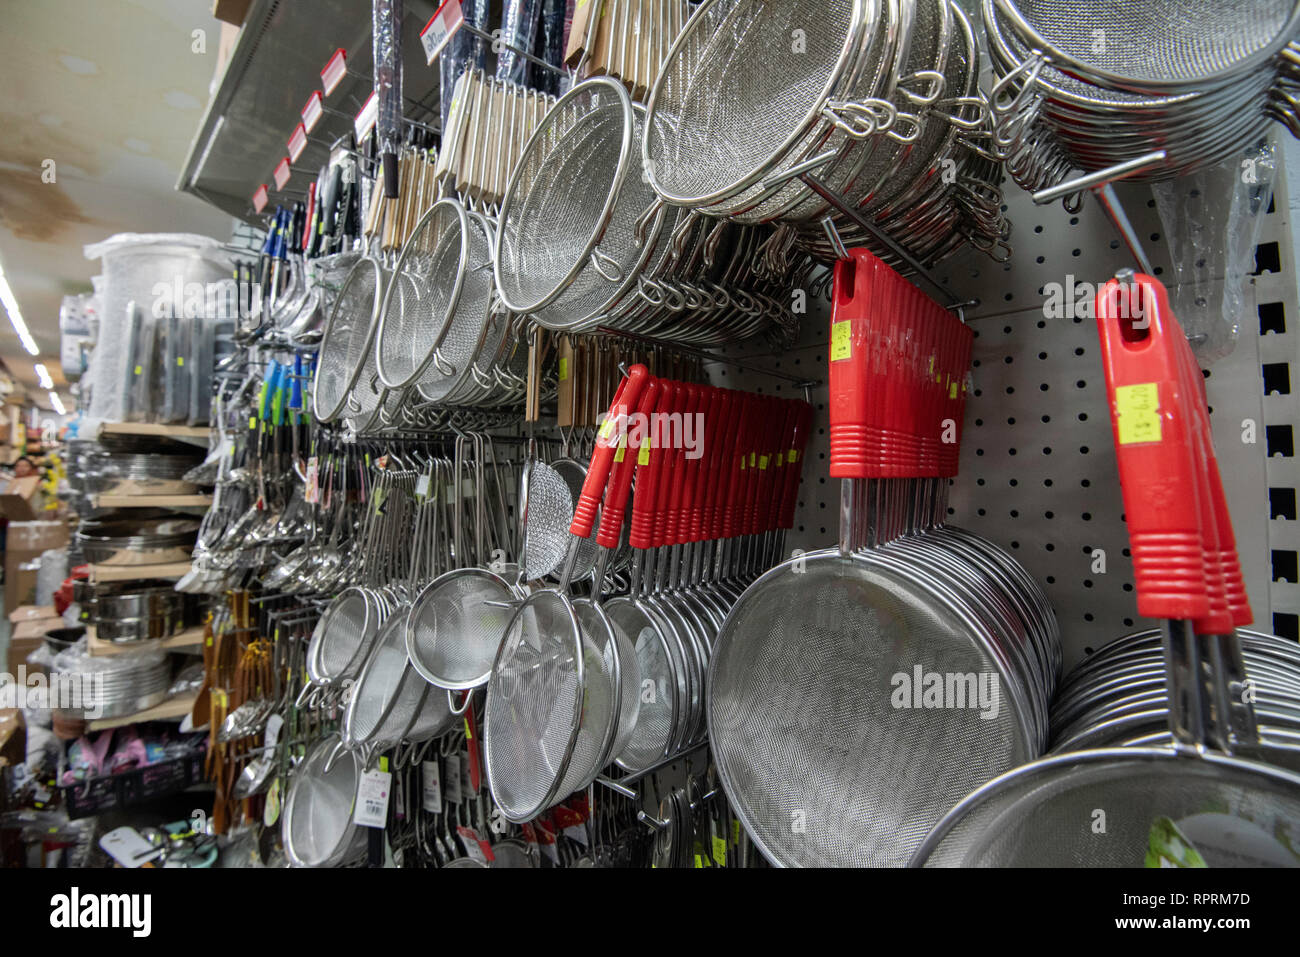 Food strainers with red plastic handles hanging for sale in an Asian supermarket or grocery store in the Sydney suburb of Cabramatta in Australia Stock Photo